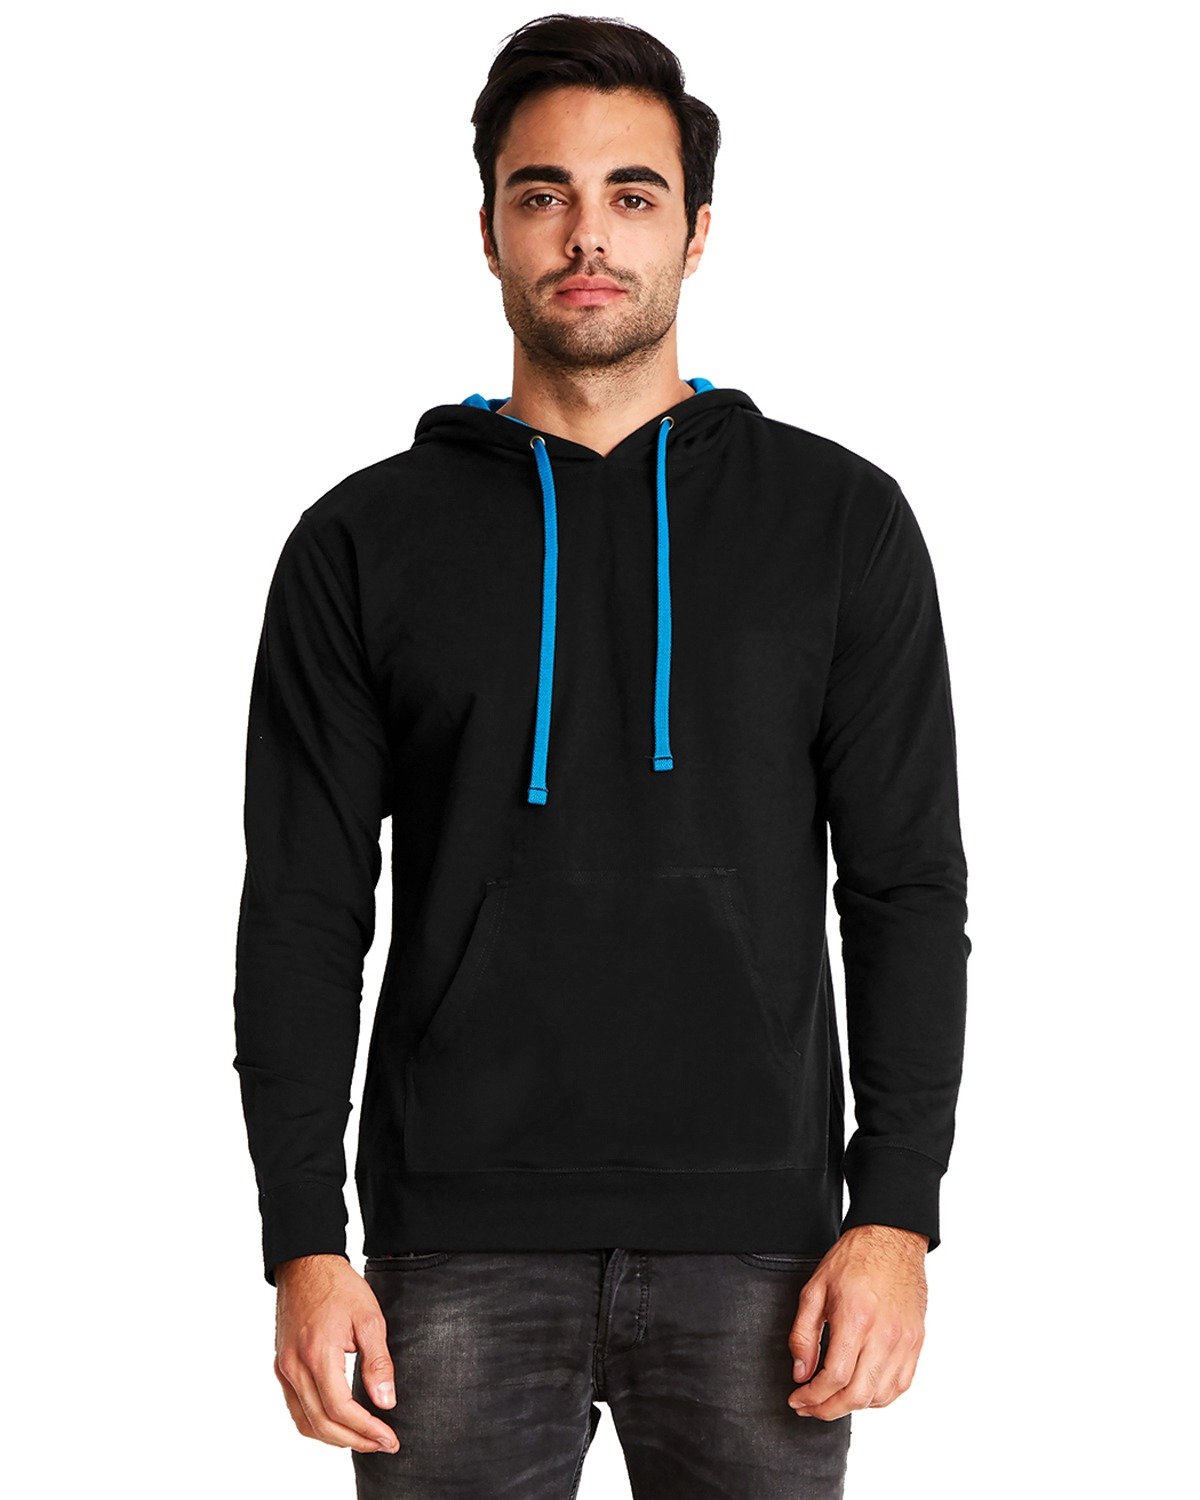 Next Level Apparel Unisex French Terry Pullover Hoodie BLACK/ TURQUOISE 